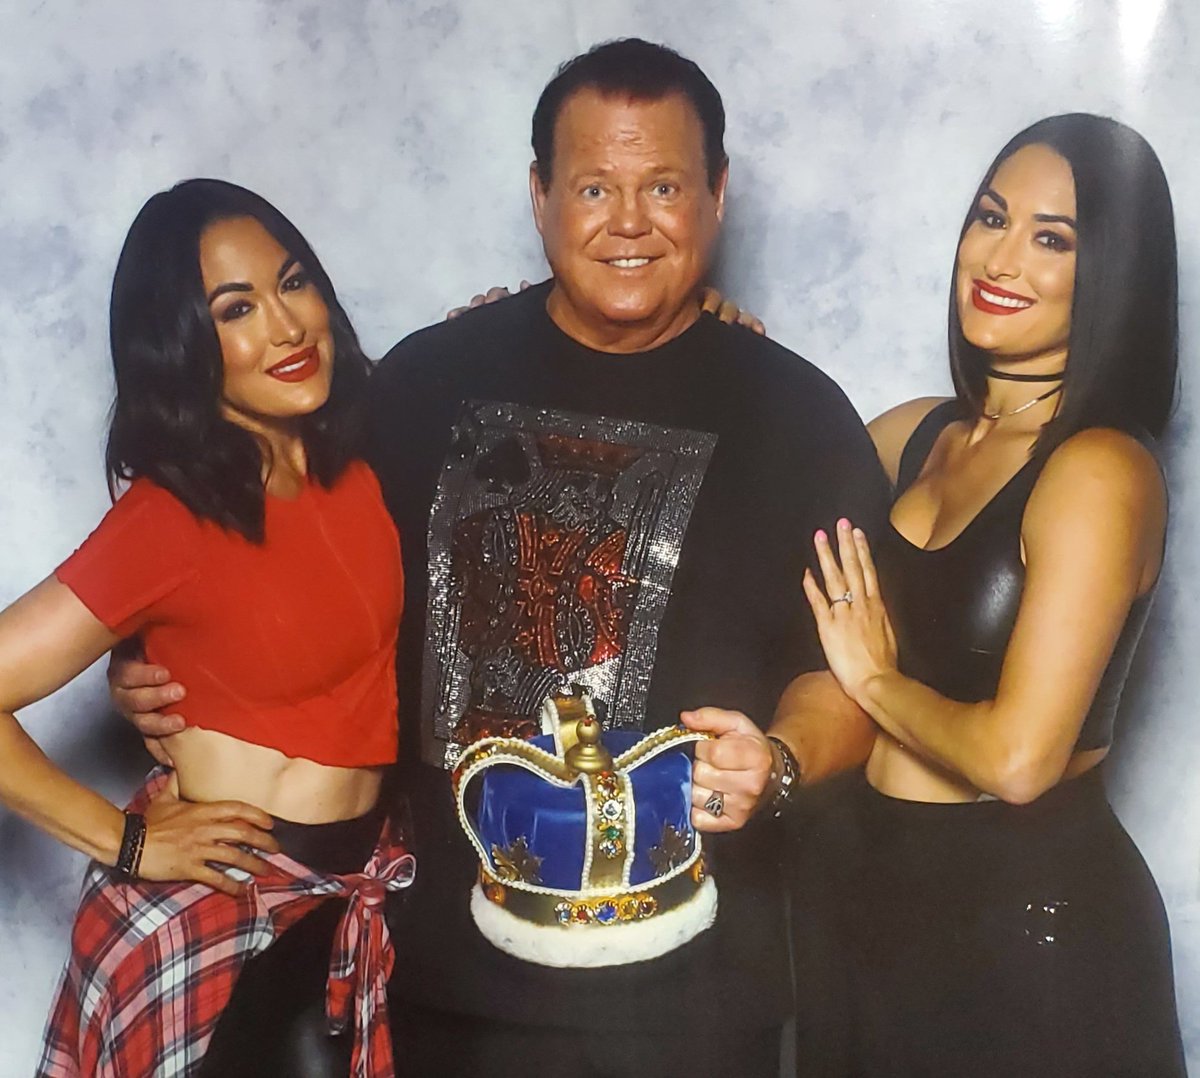 RT @JerryLawler: With two of my all-time favorite Divas! @BellaTwins 
Nikki & Brie Bella https://t.co/9zcXkAalfj